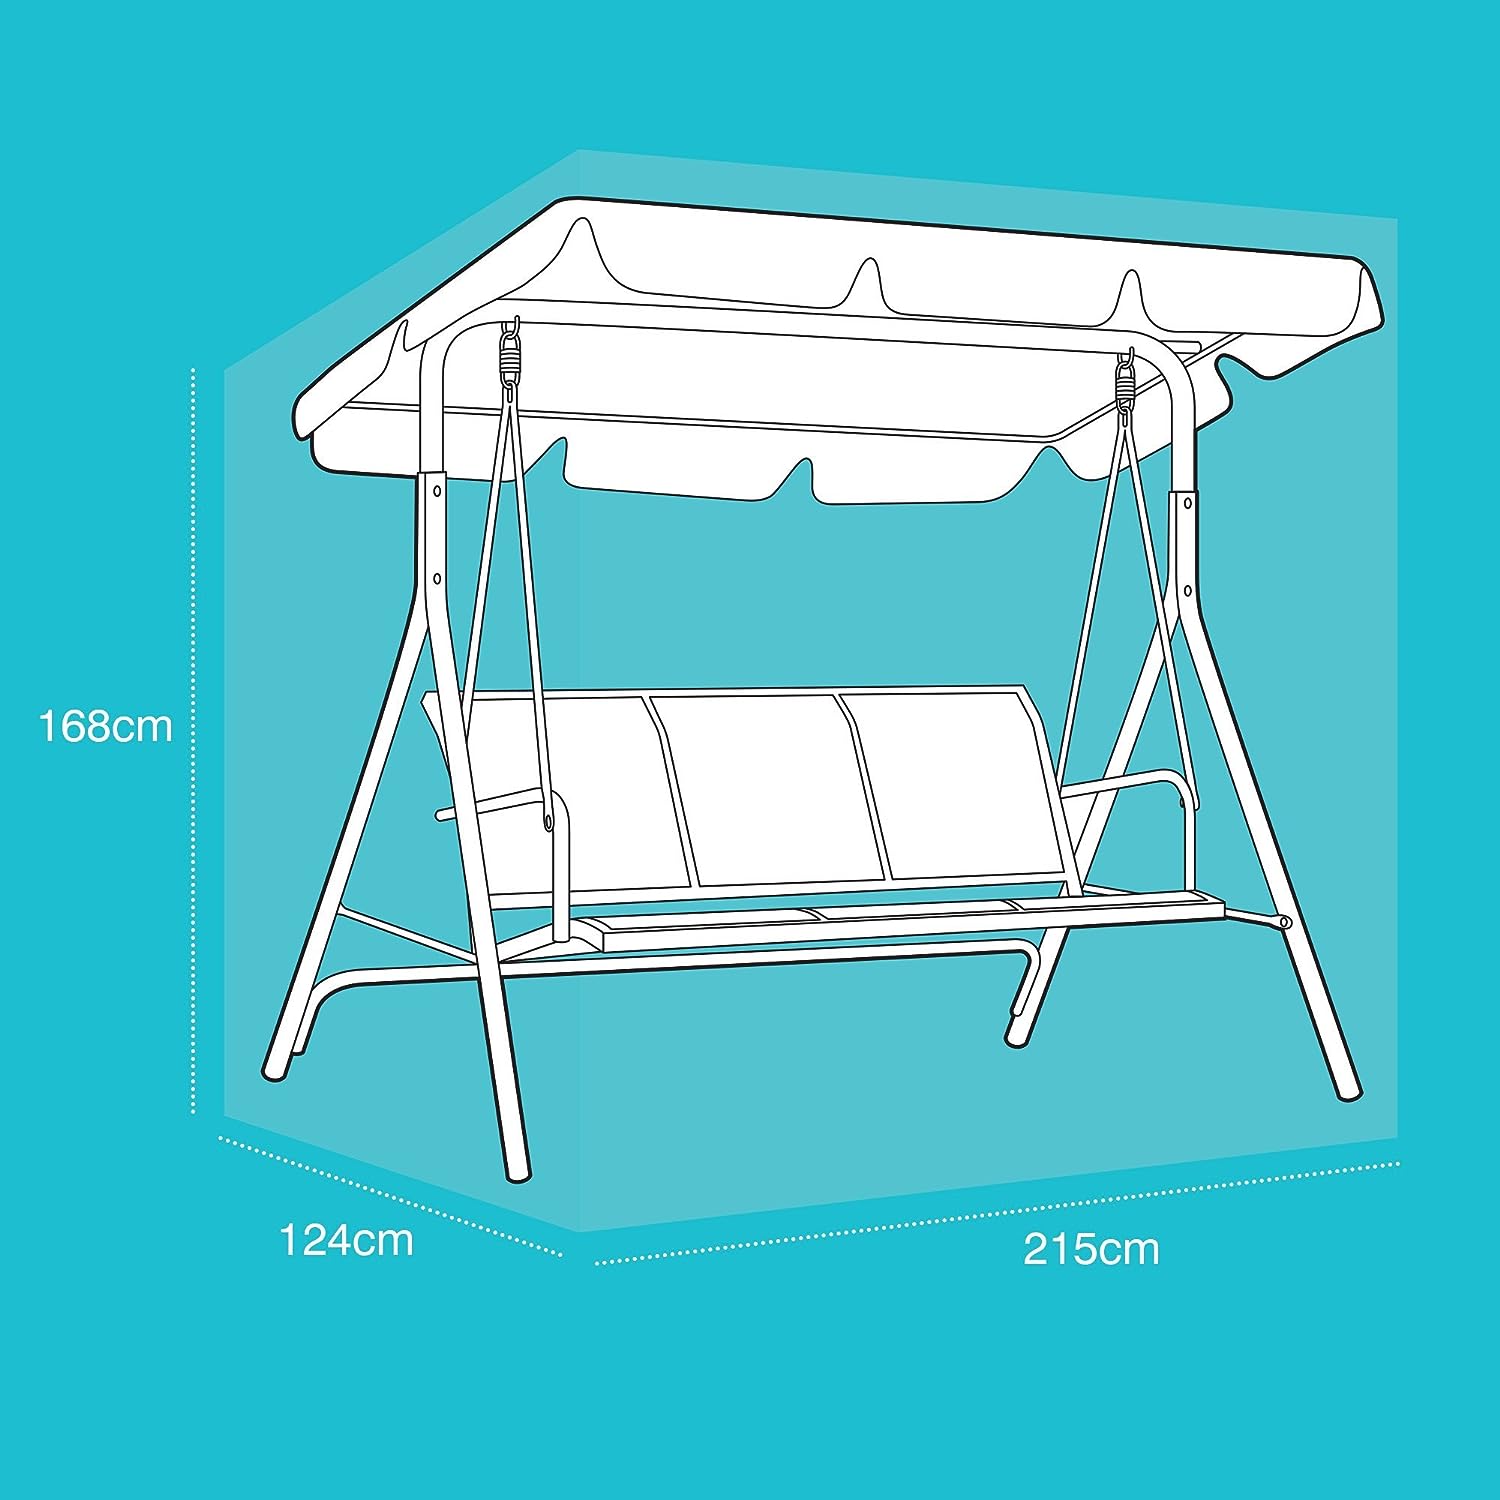 Dimensions of the 3 Seat Swing Hammock Cover